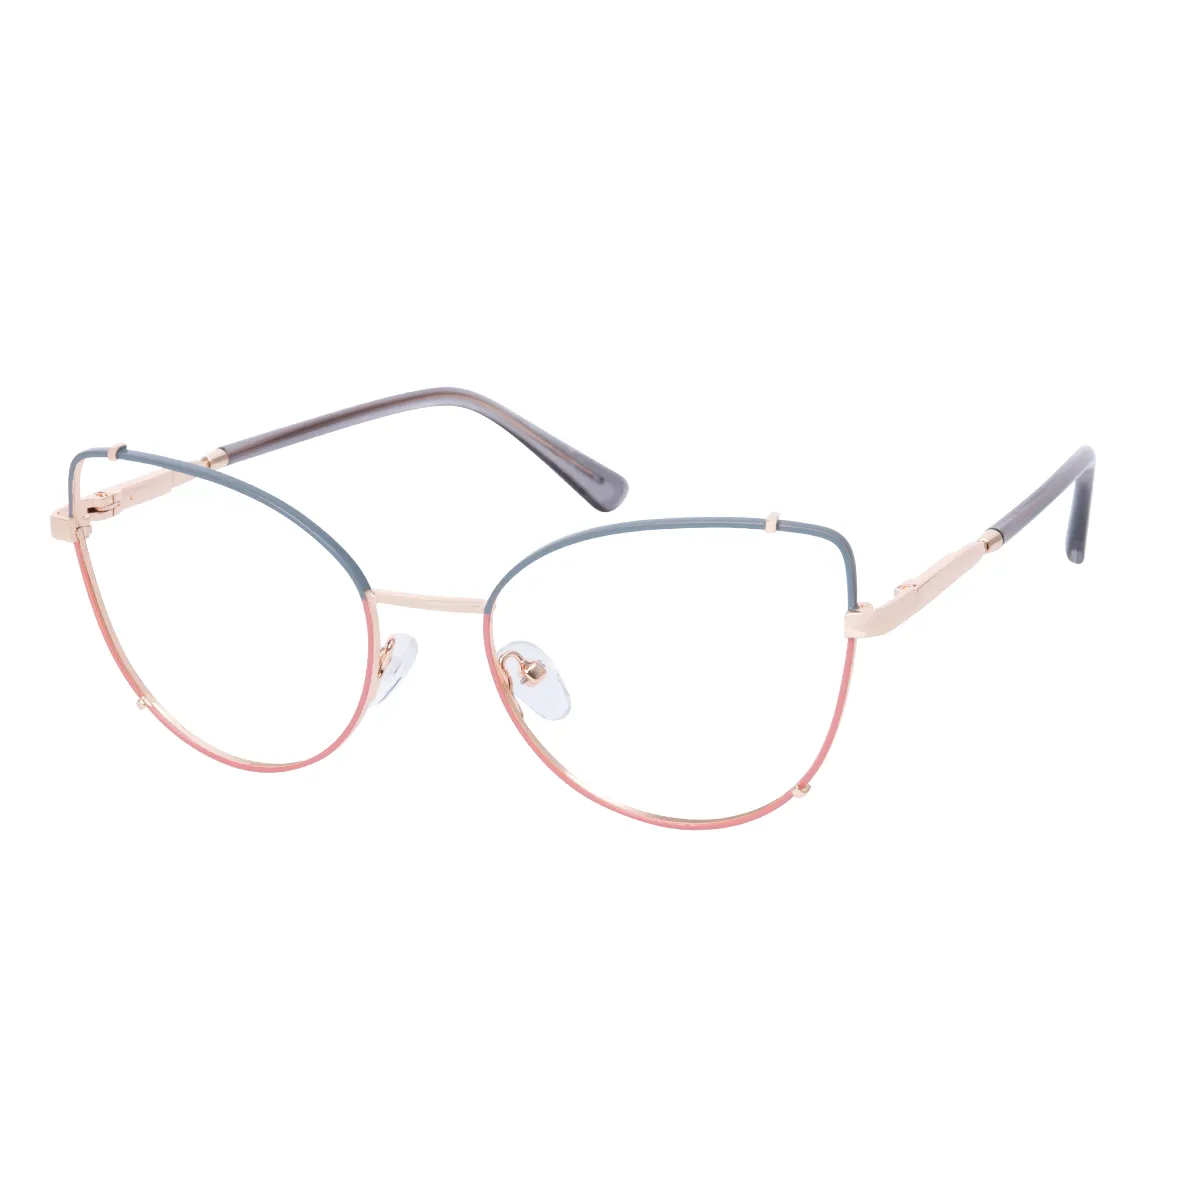 Reeve - Cat-eye Pink Glasses for Women